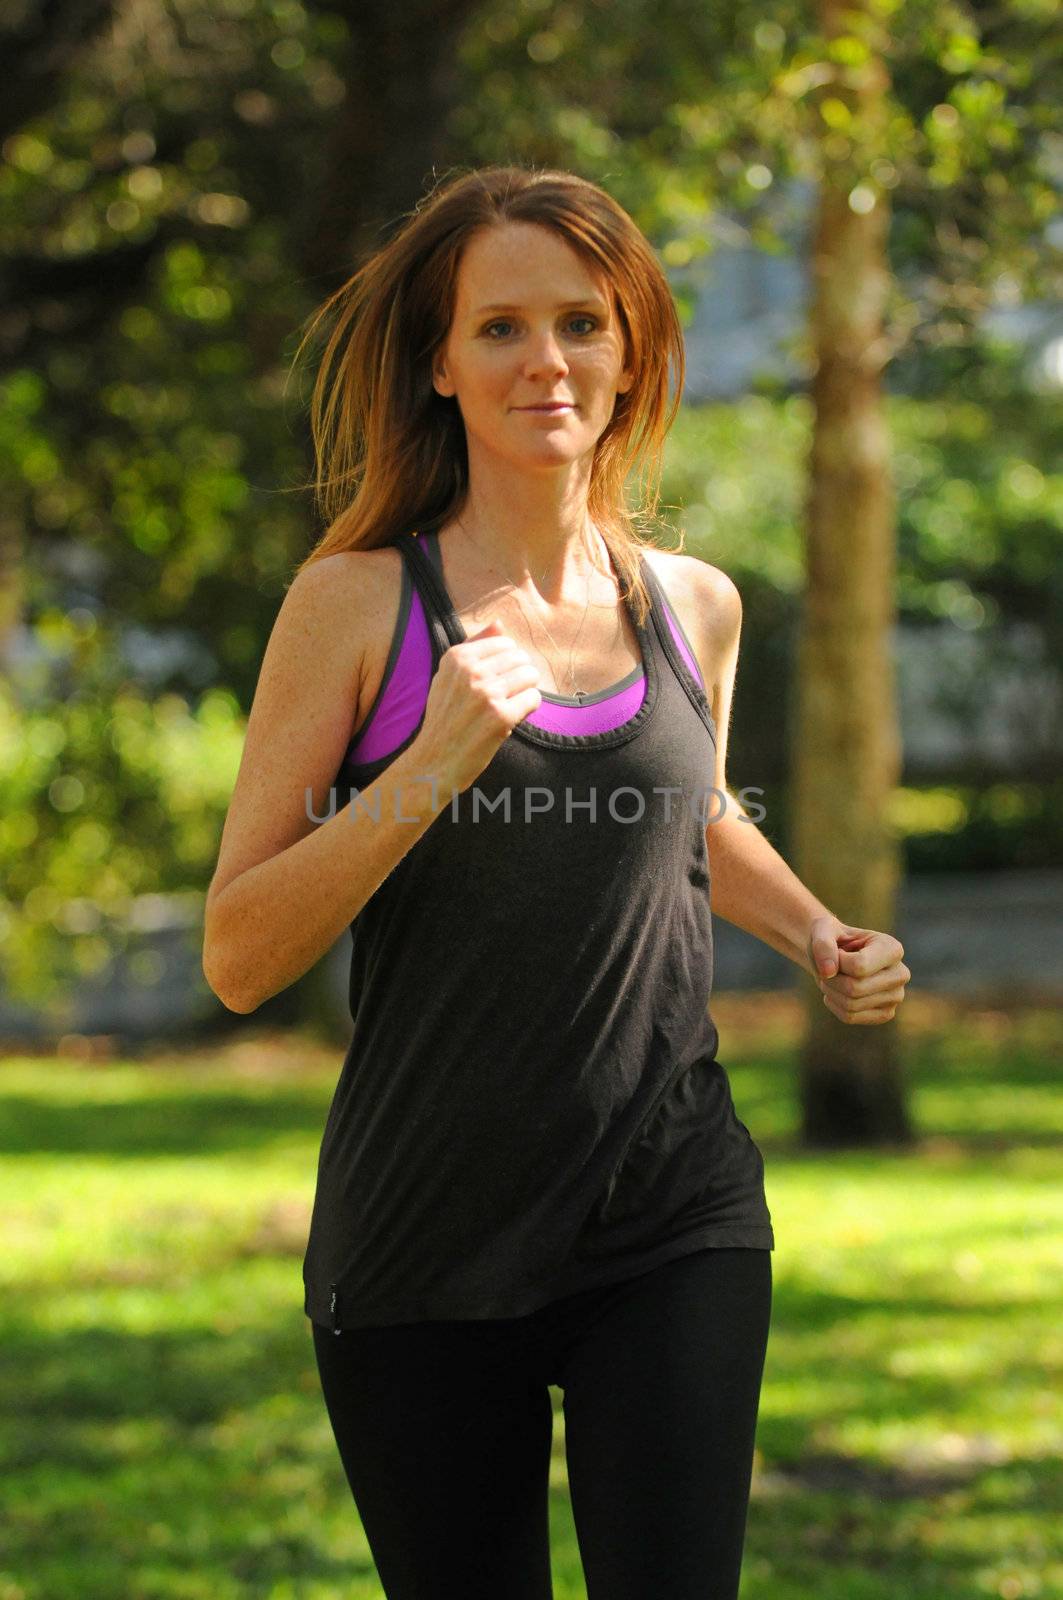 young woman with long hair getting in shape by running